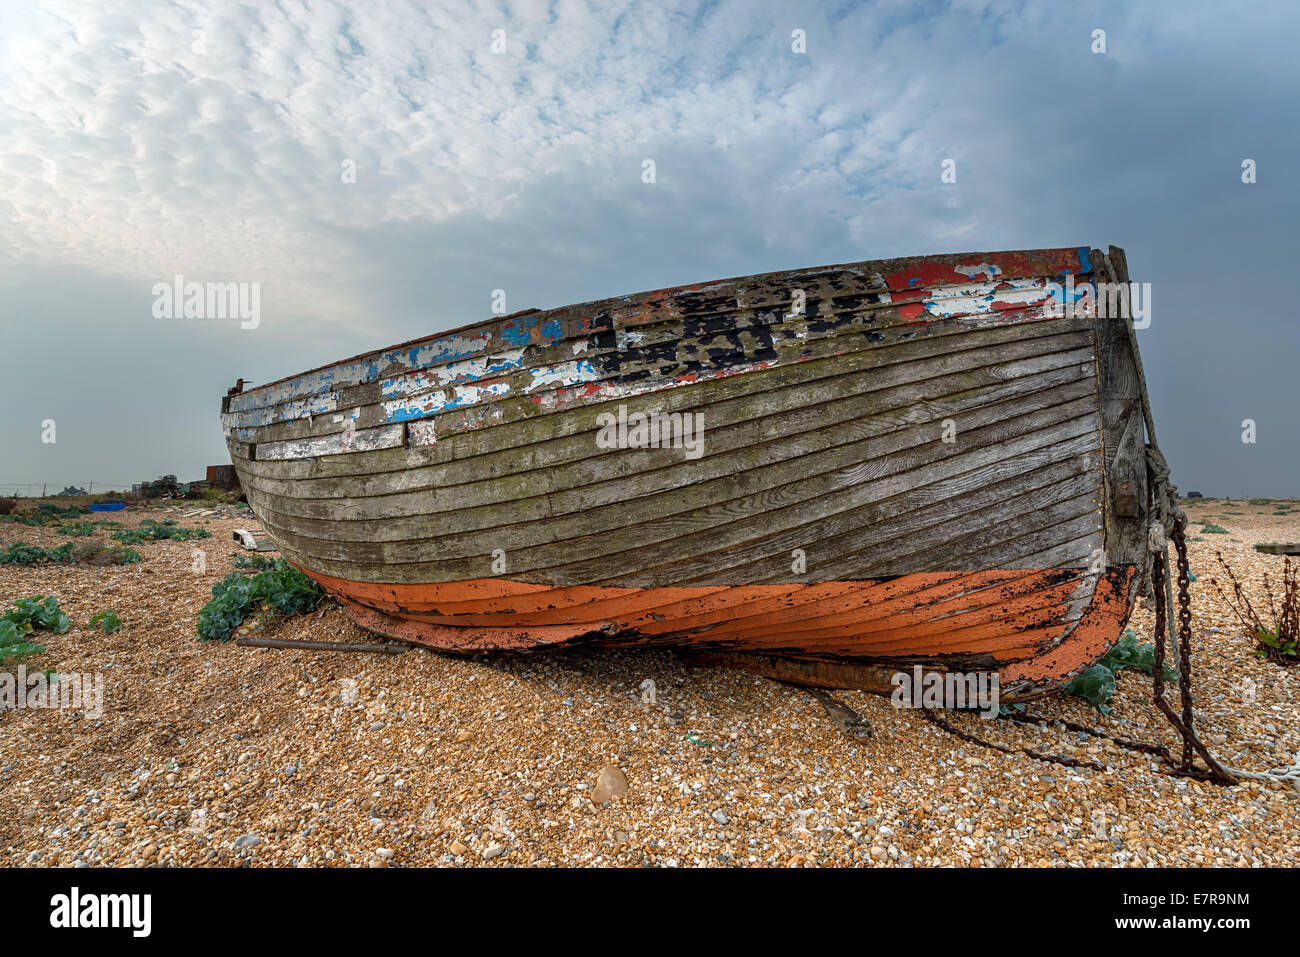 An old abandoned wrecked wooden fishing boat high on a shingle beach Stock Photo